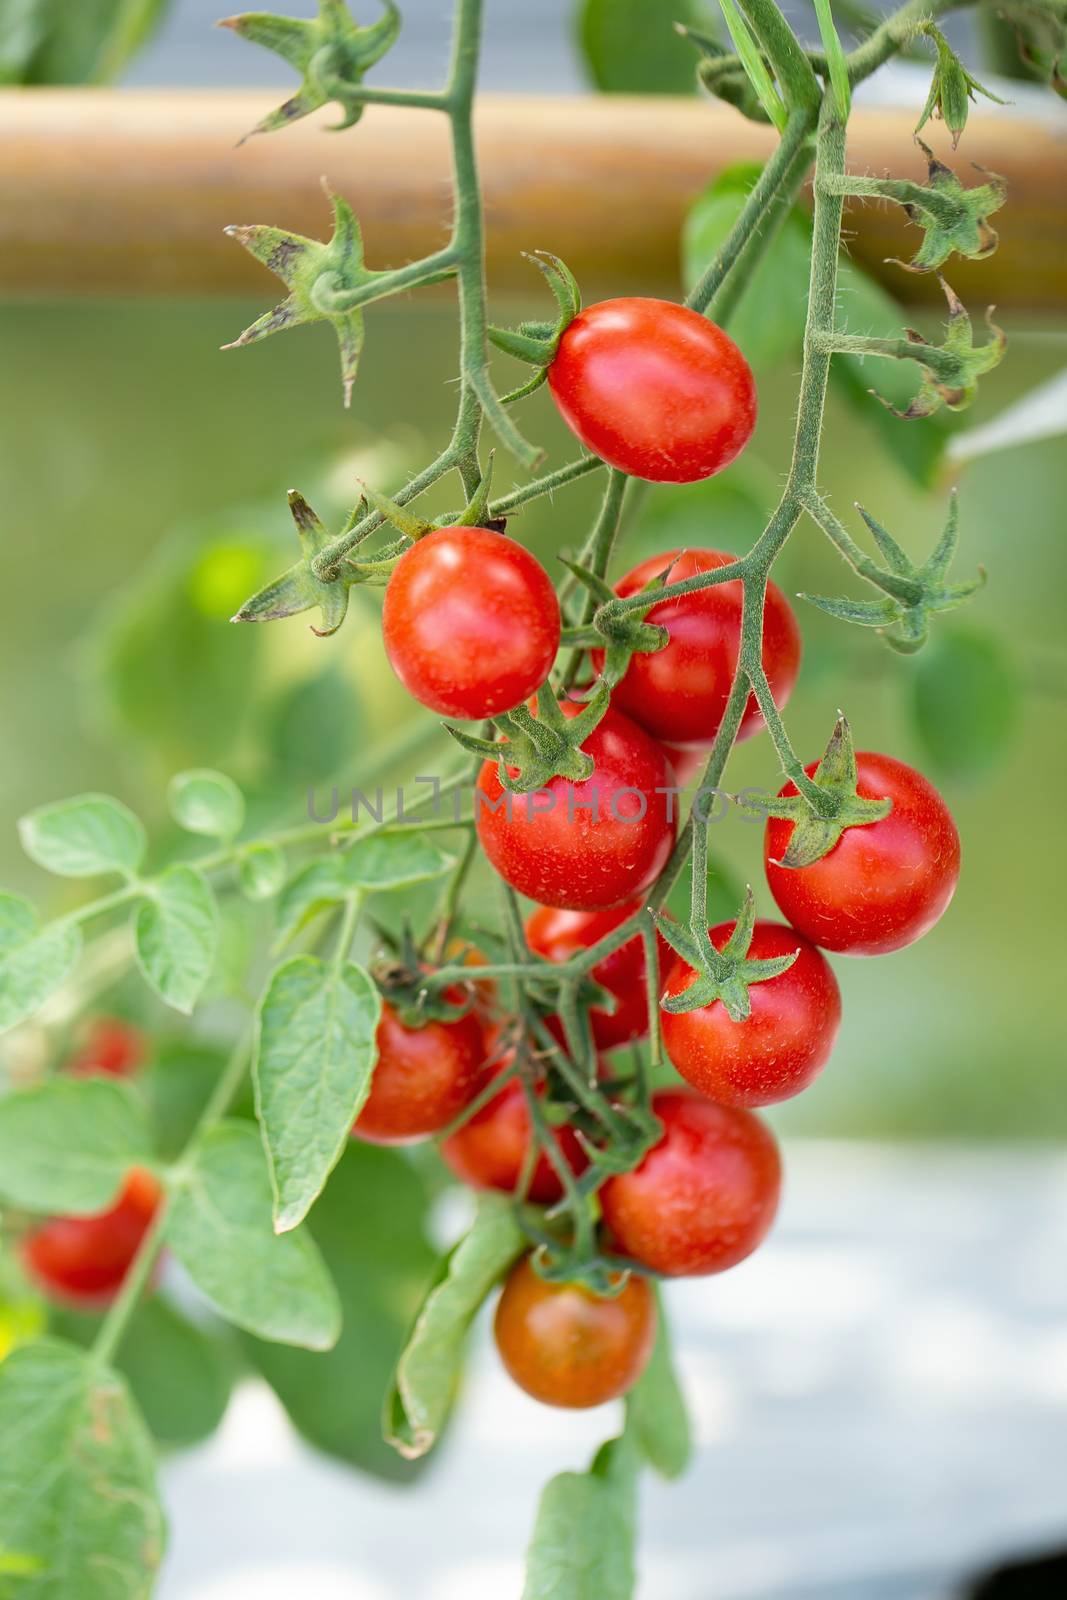 Ripe red tomatoes are hanging on the tomato tree in the garden by kaiskynet